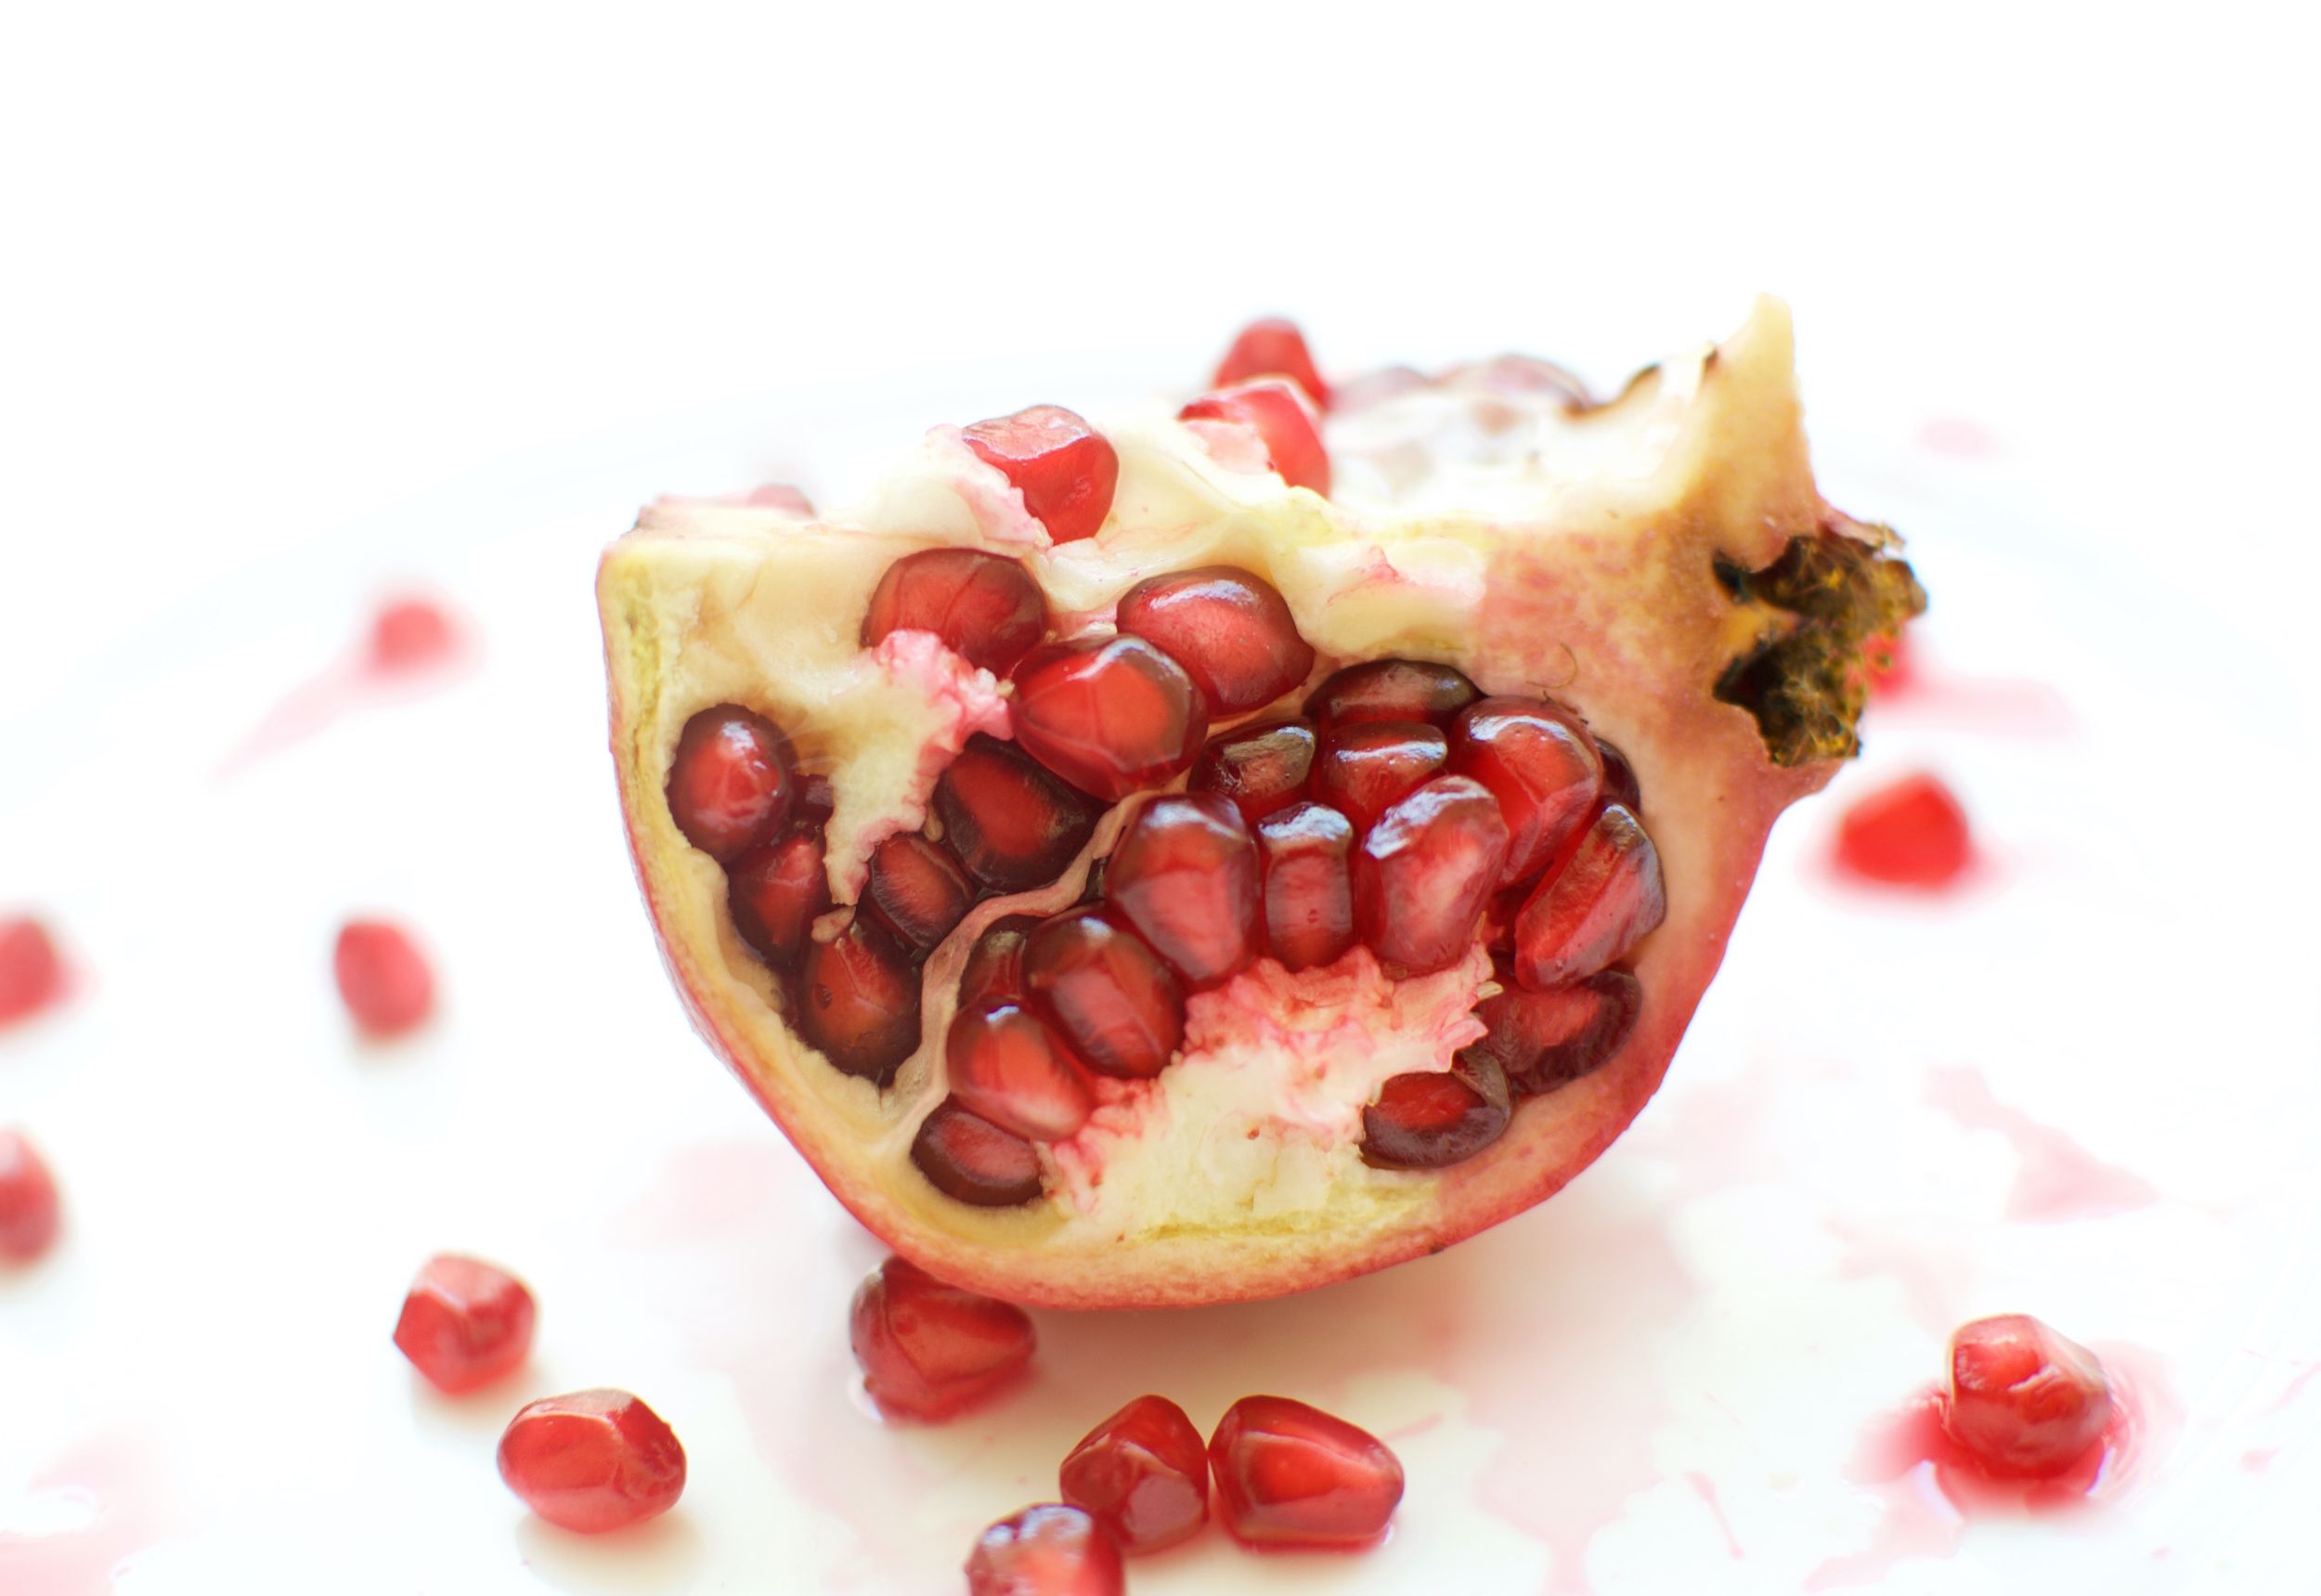 Pomegranate with seeds in the background